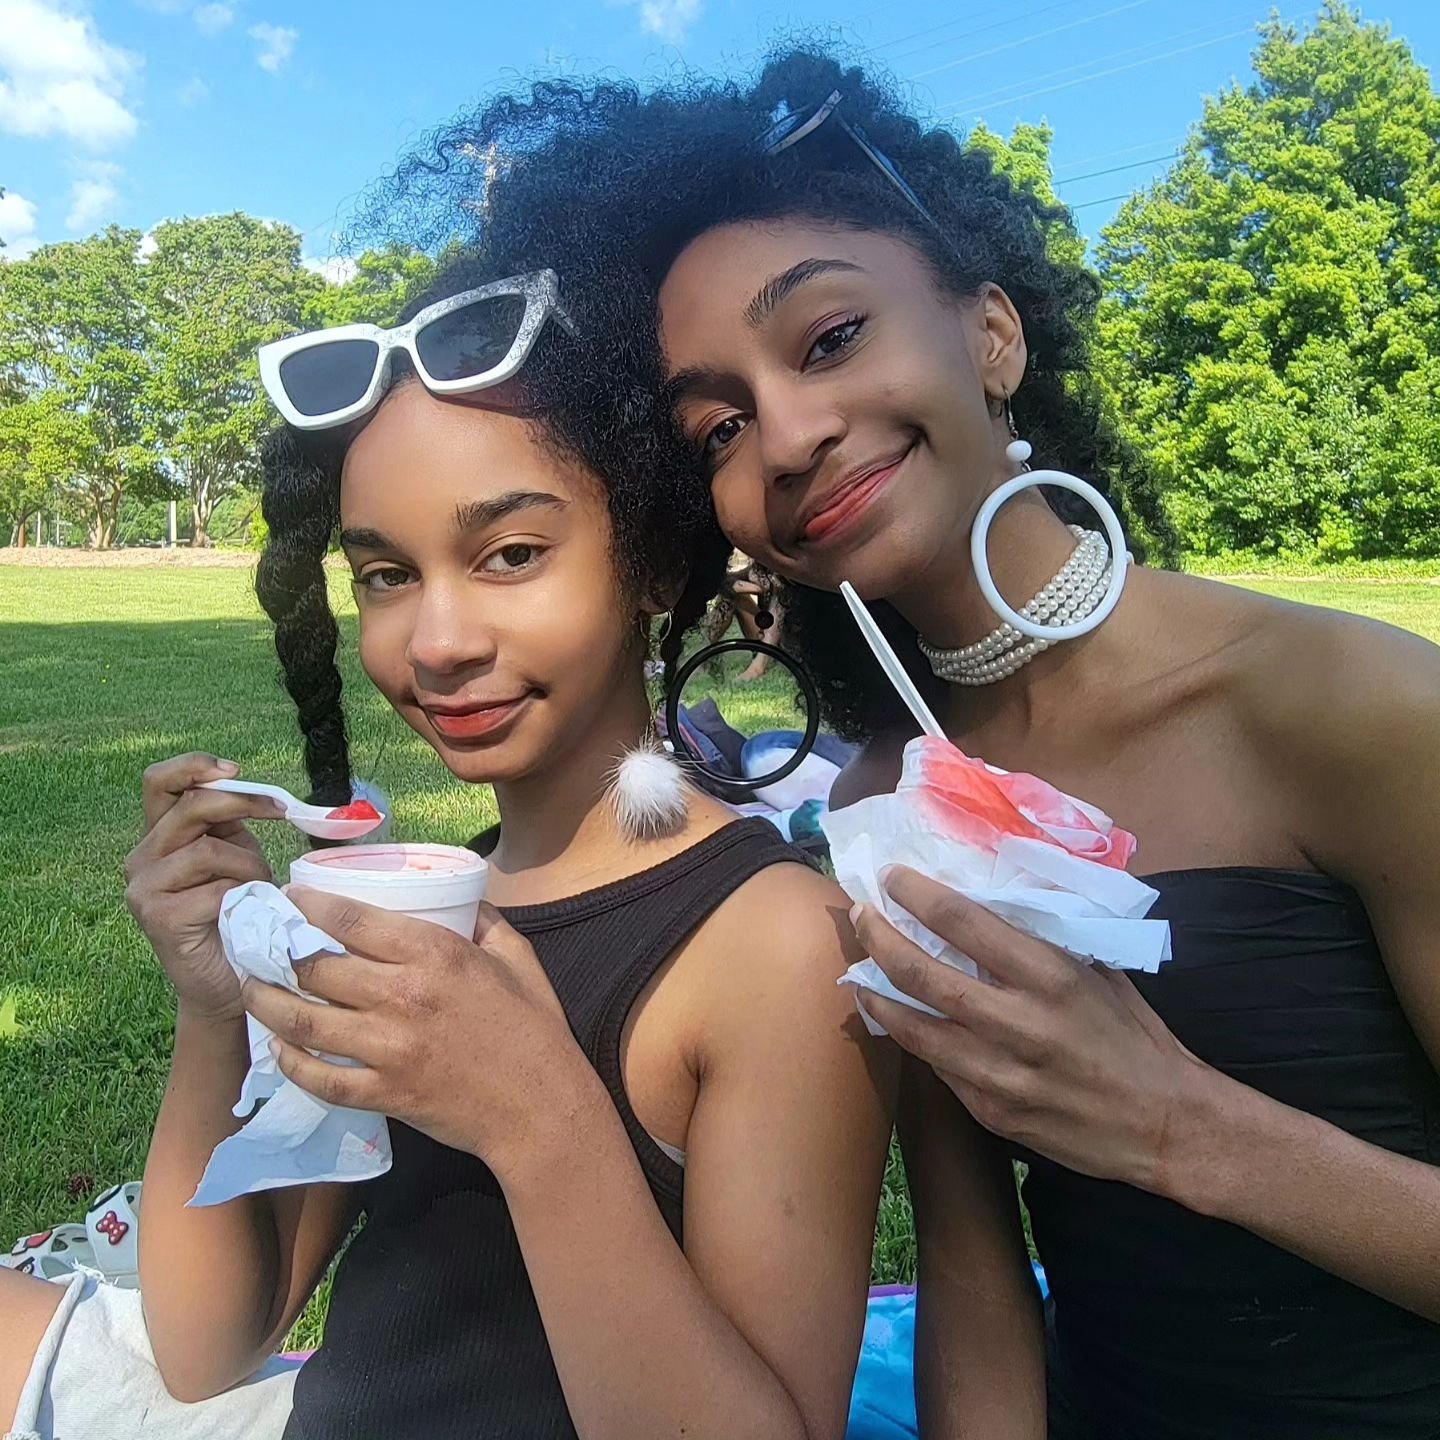 Jazz.🎶 

A &quot;chill&quot; crowd. 

A great cause. 

Yesterday, we made it to High Point for the first Trane Tracks festival. A fundraiser to renovate (the legendary) John Coltrane's childhood home. 

My girls made a mess enjoying cherry Italian I